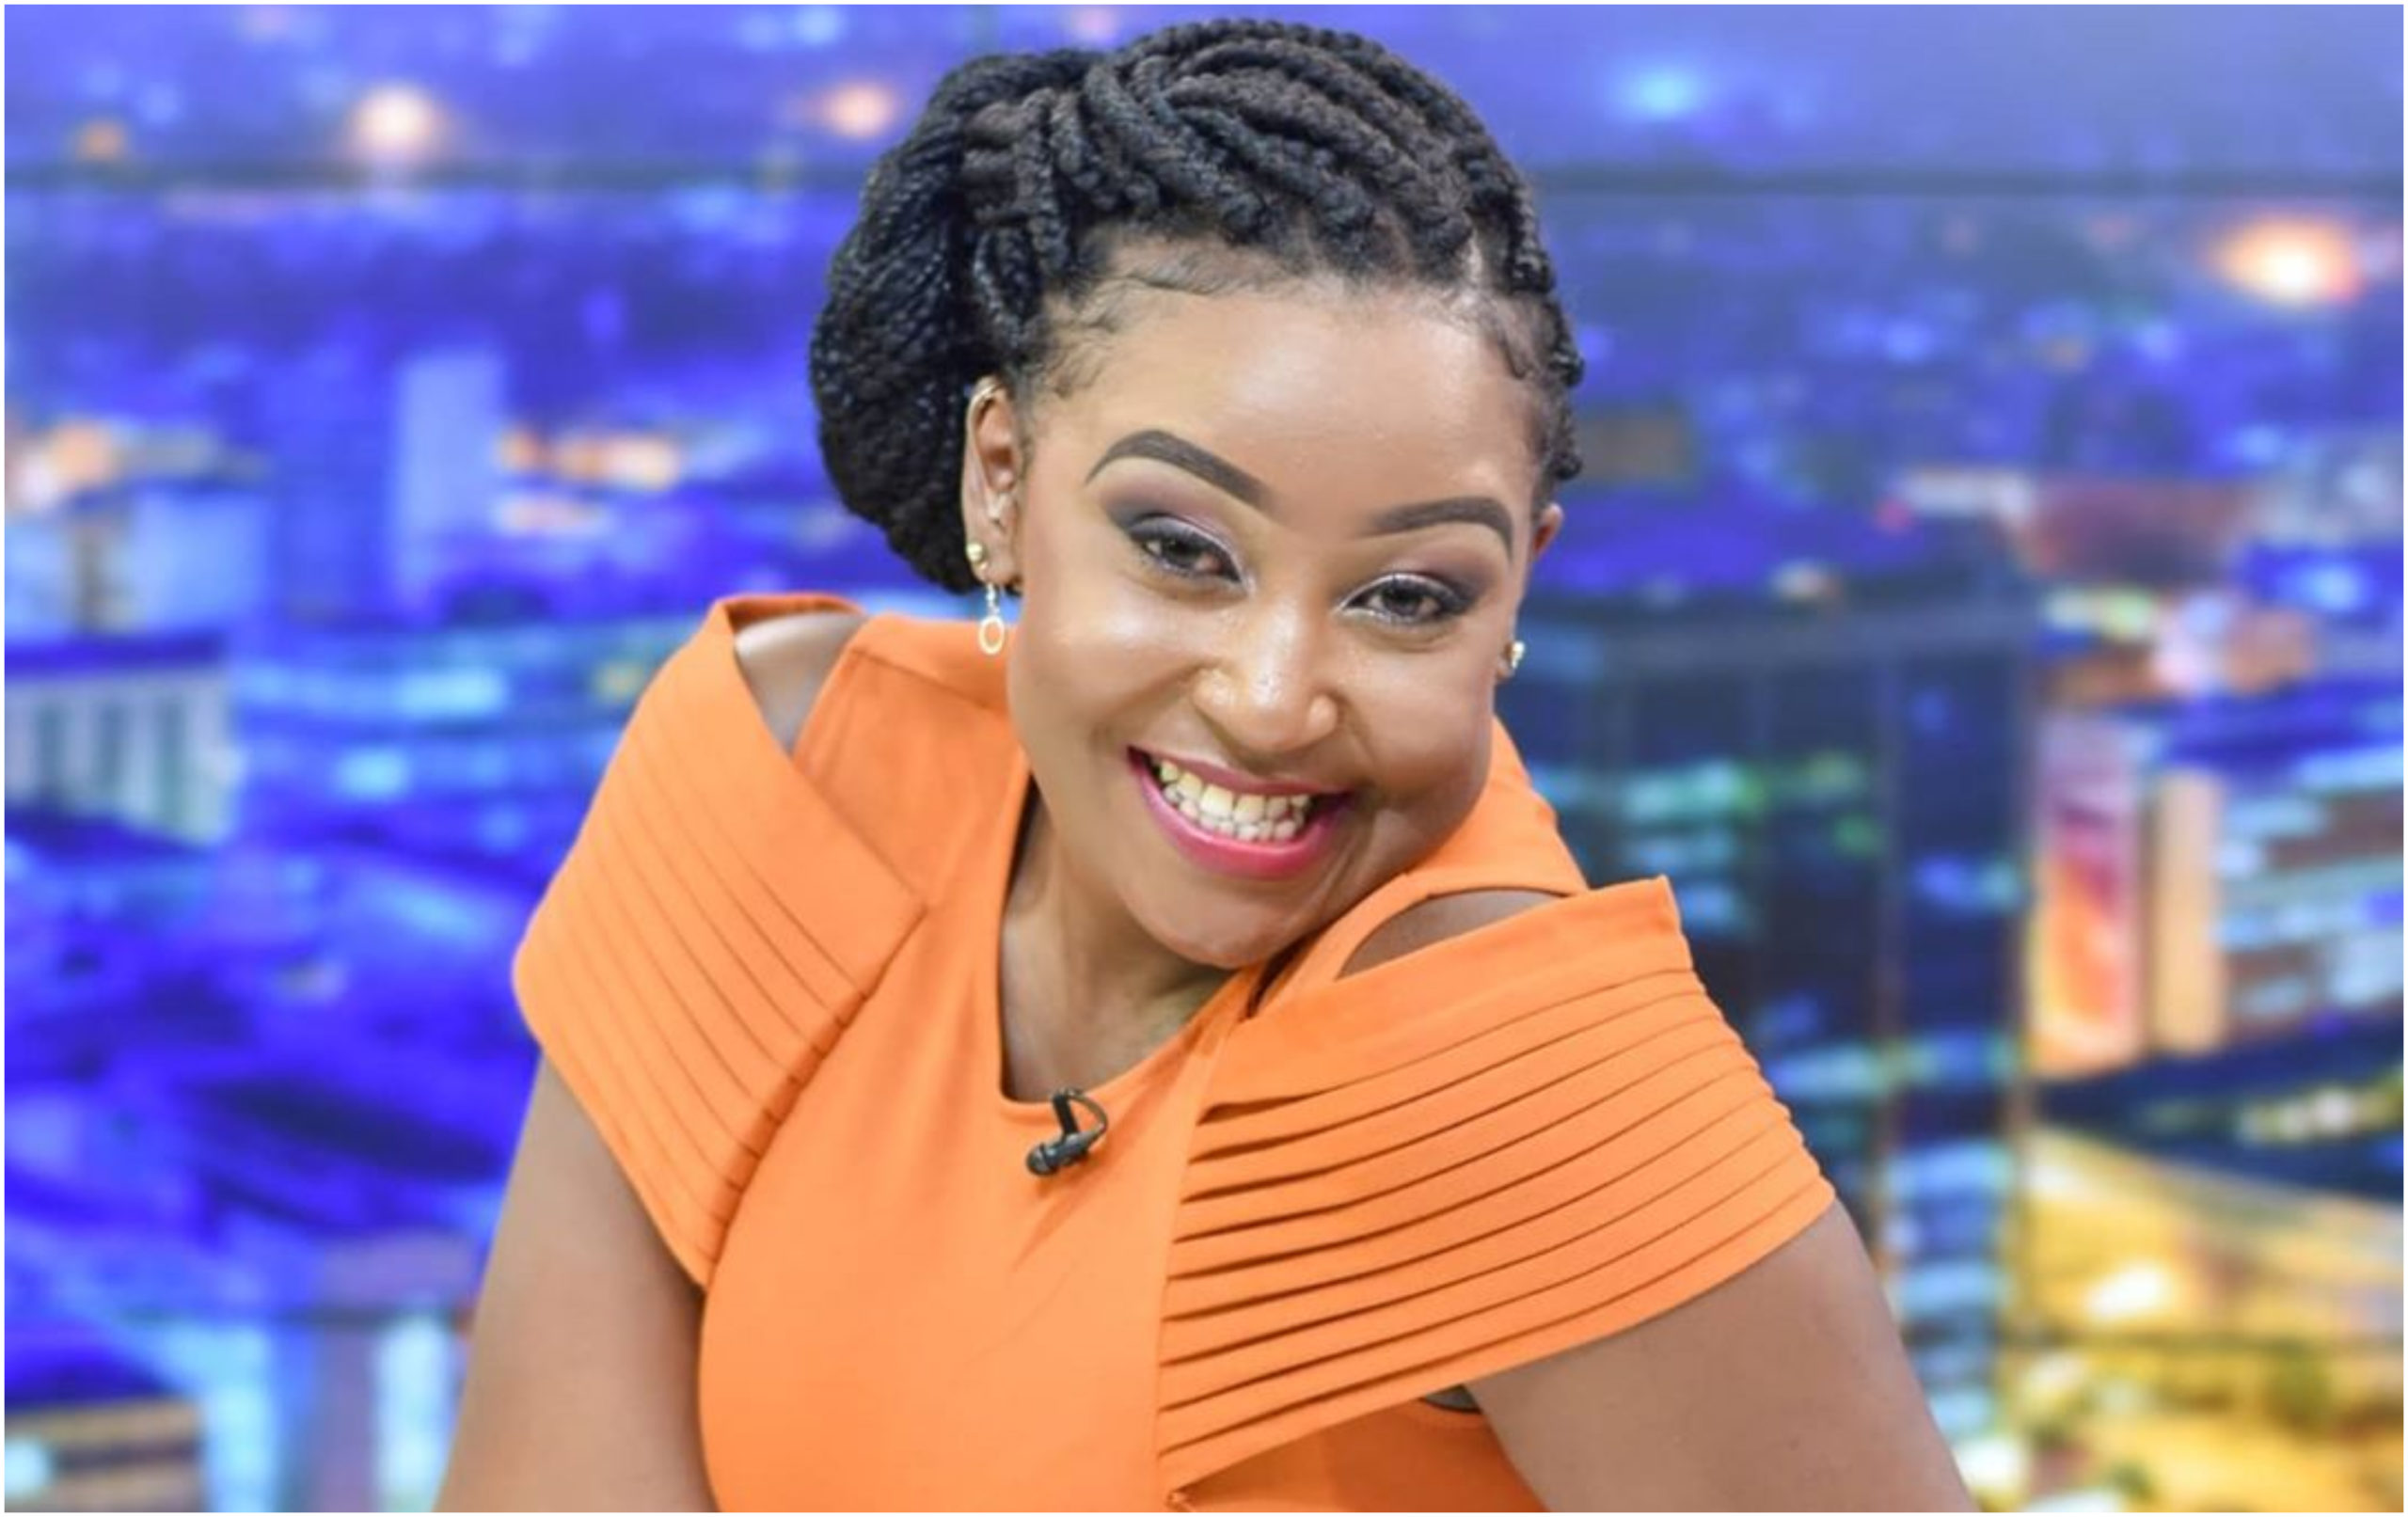 After three years, Betty Kyalo rumored to be headed back to TV (PHOTOS)